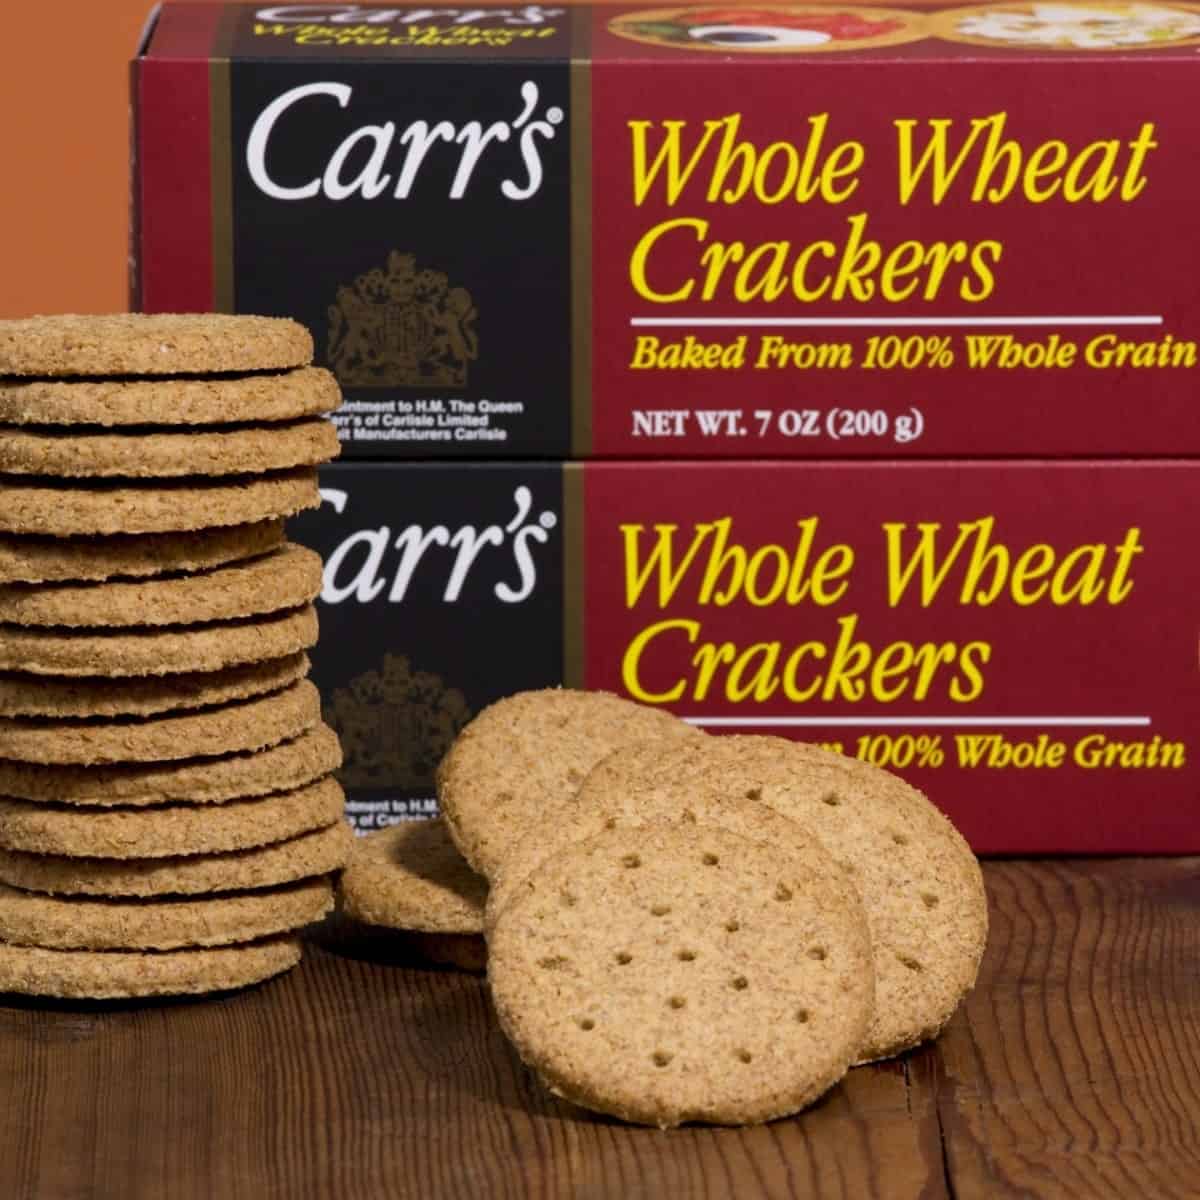 Carr's whole wheat crackers stacked on table in front of two packages of crackers.